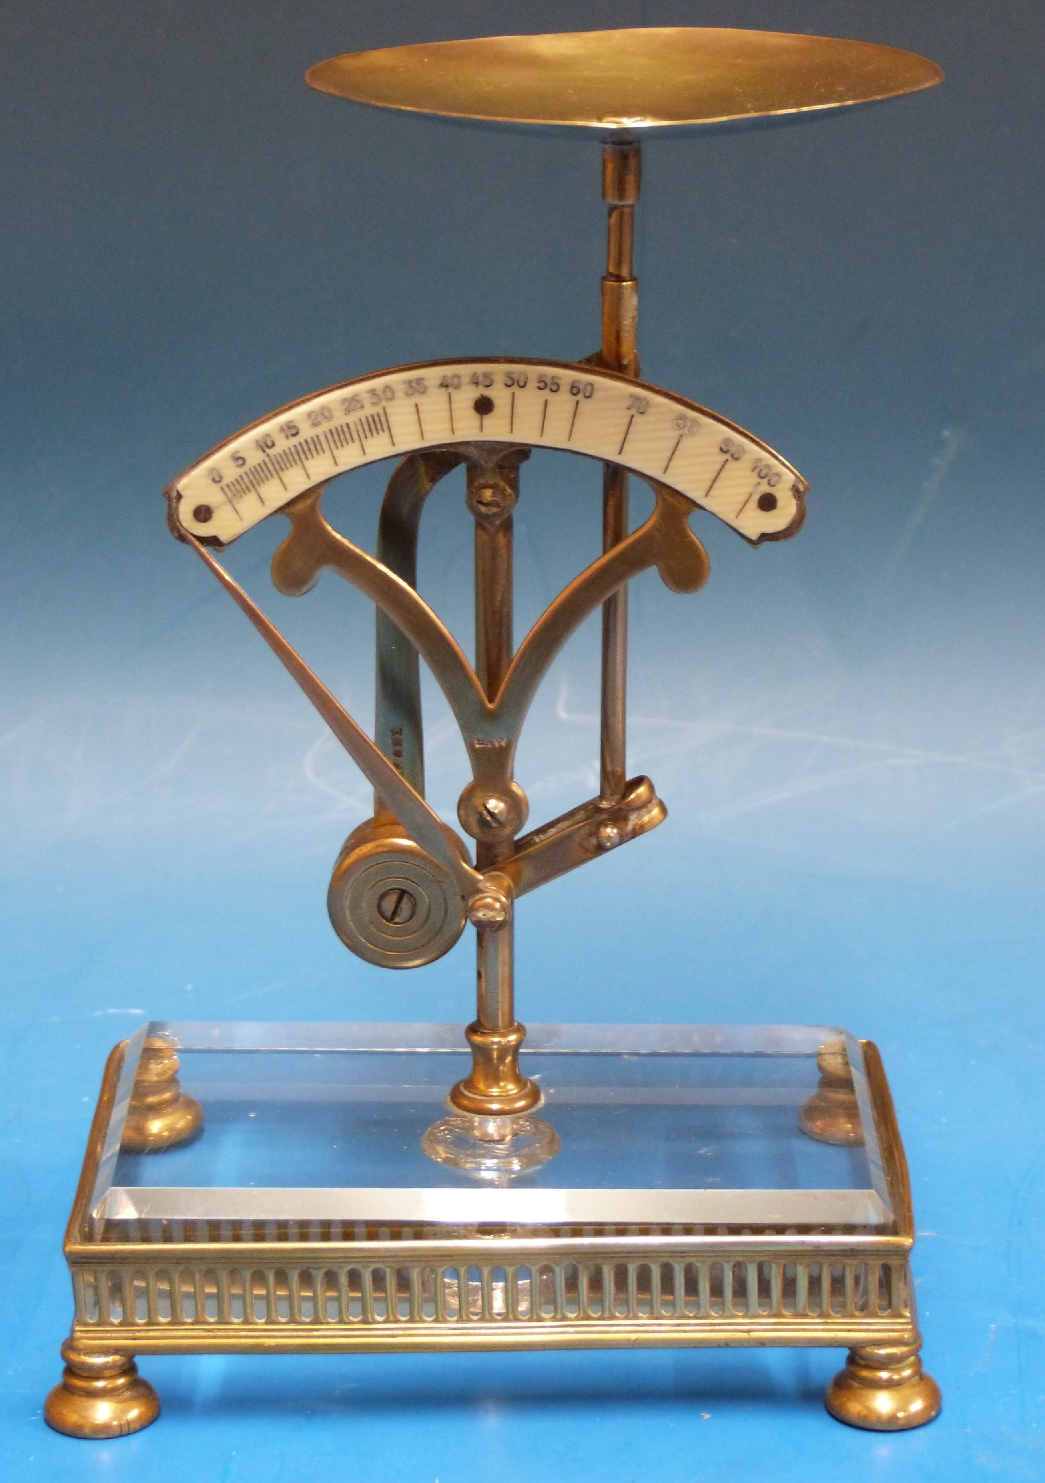 A set of pendulum type letter scales, with ivorine scale calibrated up to 100, marked E.W.